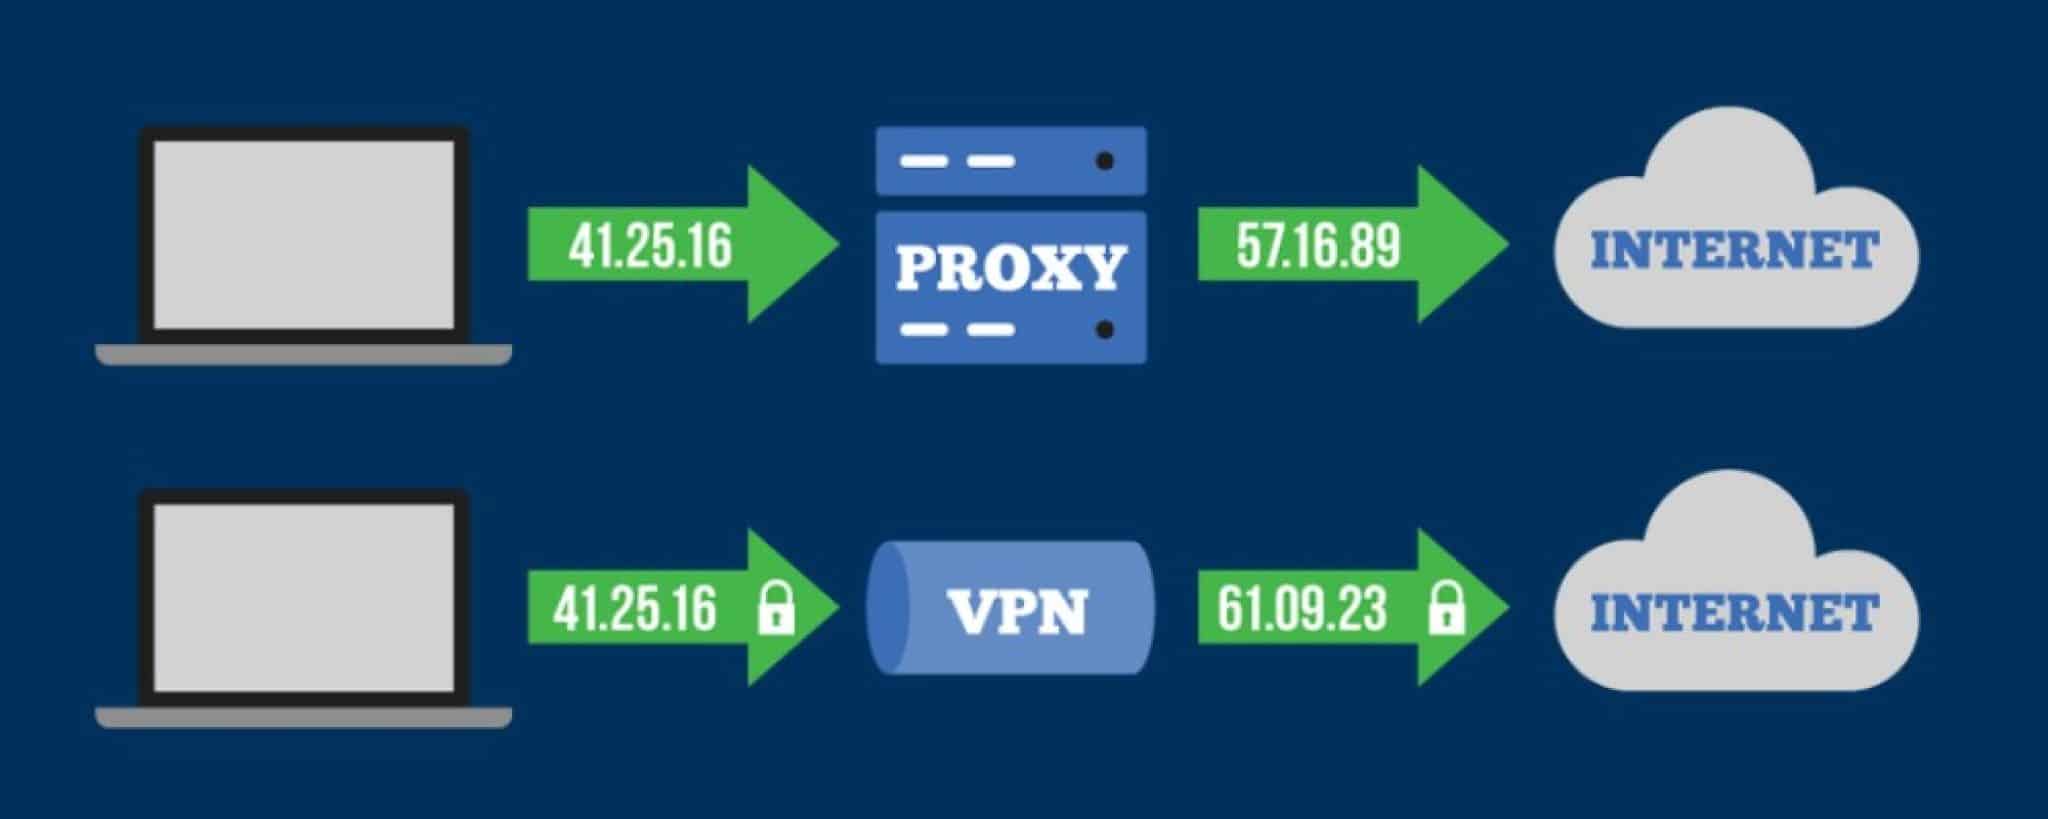 Proxy vs. VPN: 4 Differences You Should Know - TechUseful